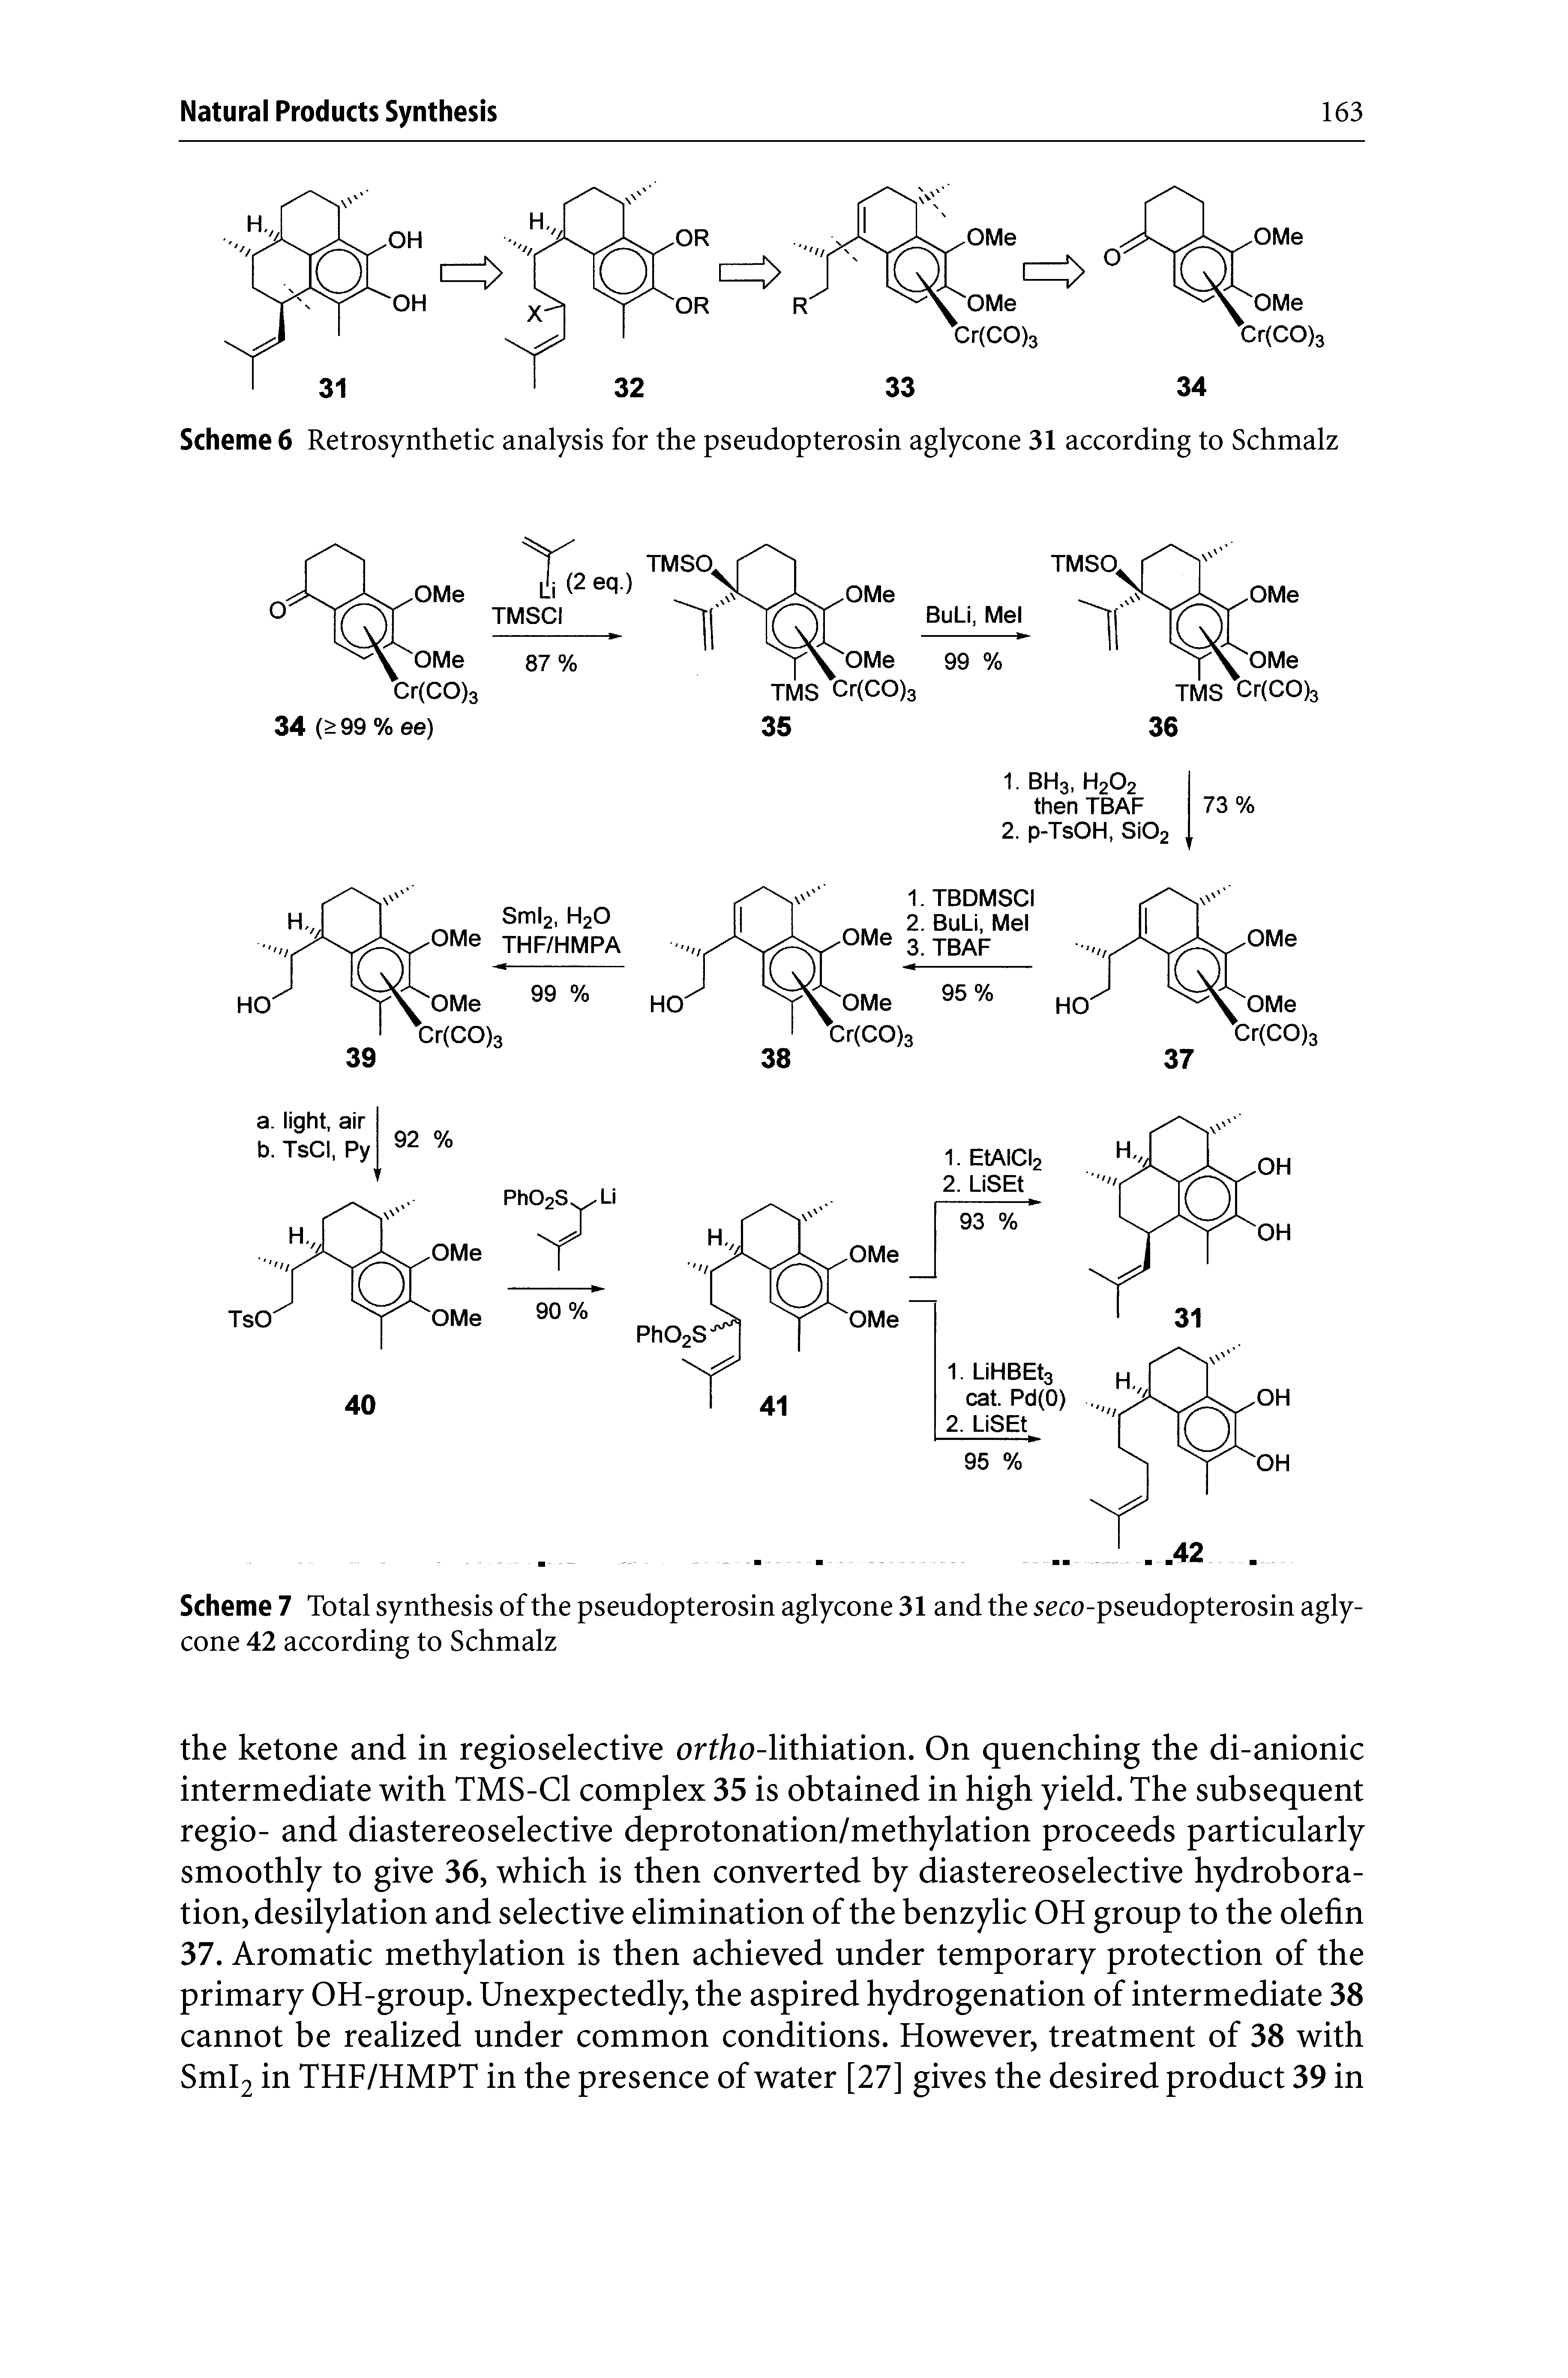 Scheme 7 Total synthesis of the pseudopterosin aglycone 31 and the seco-pseudopterosin aglycone 42 according to Schmalz...